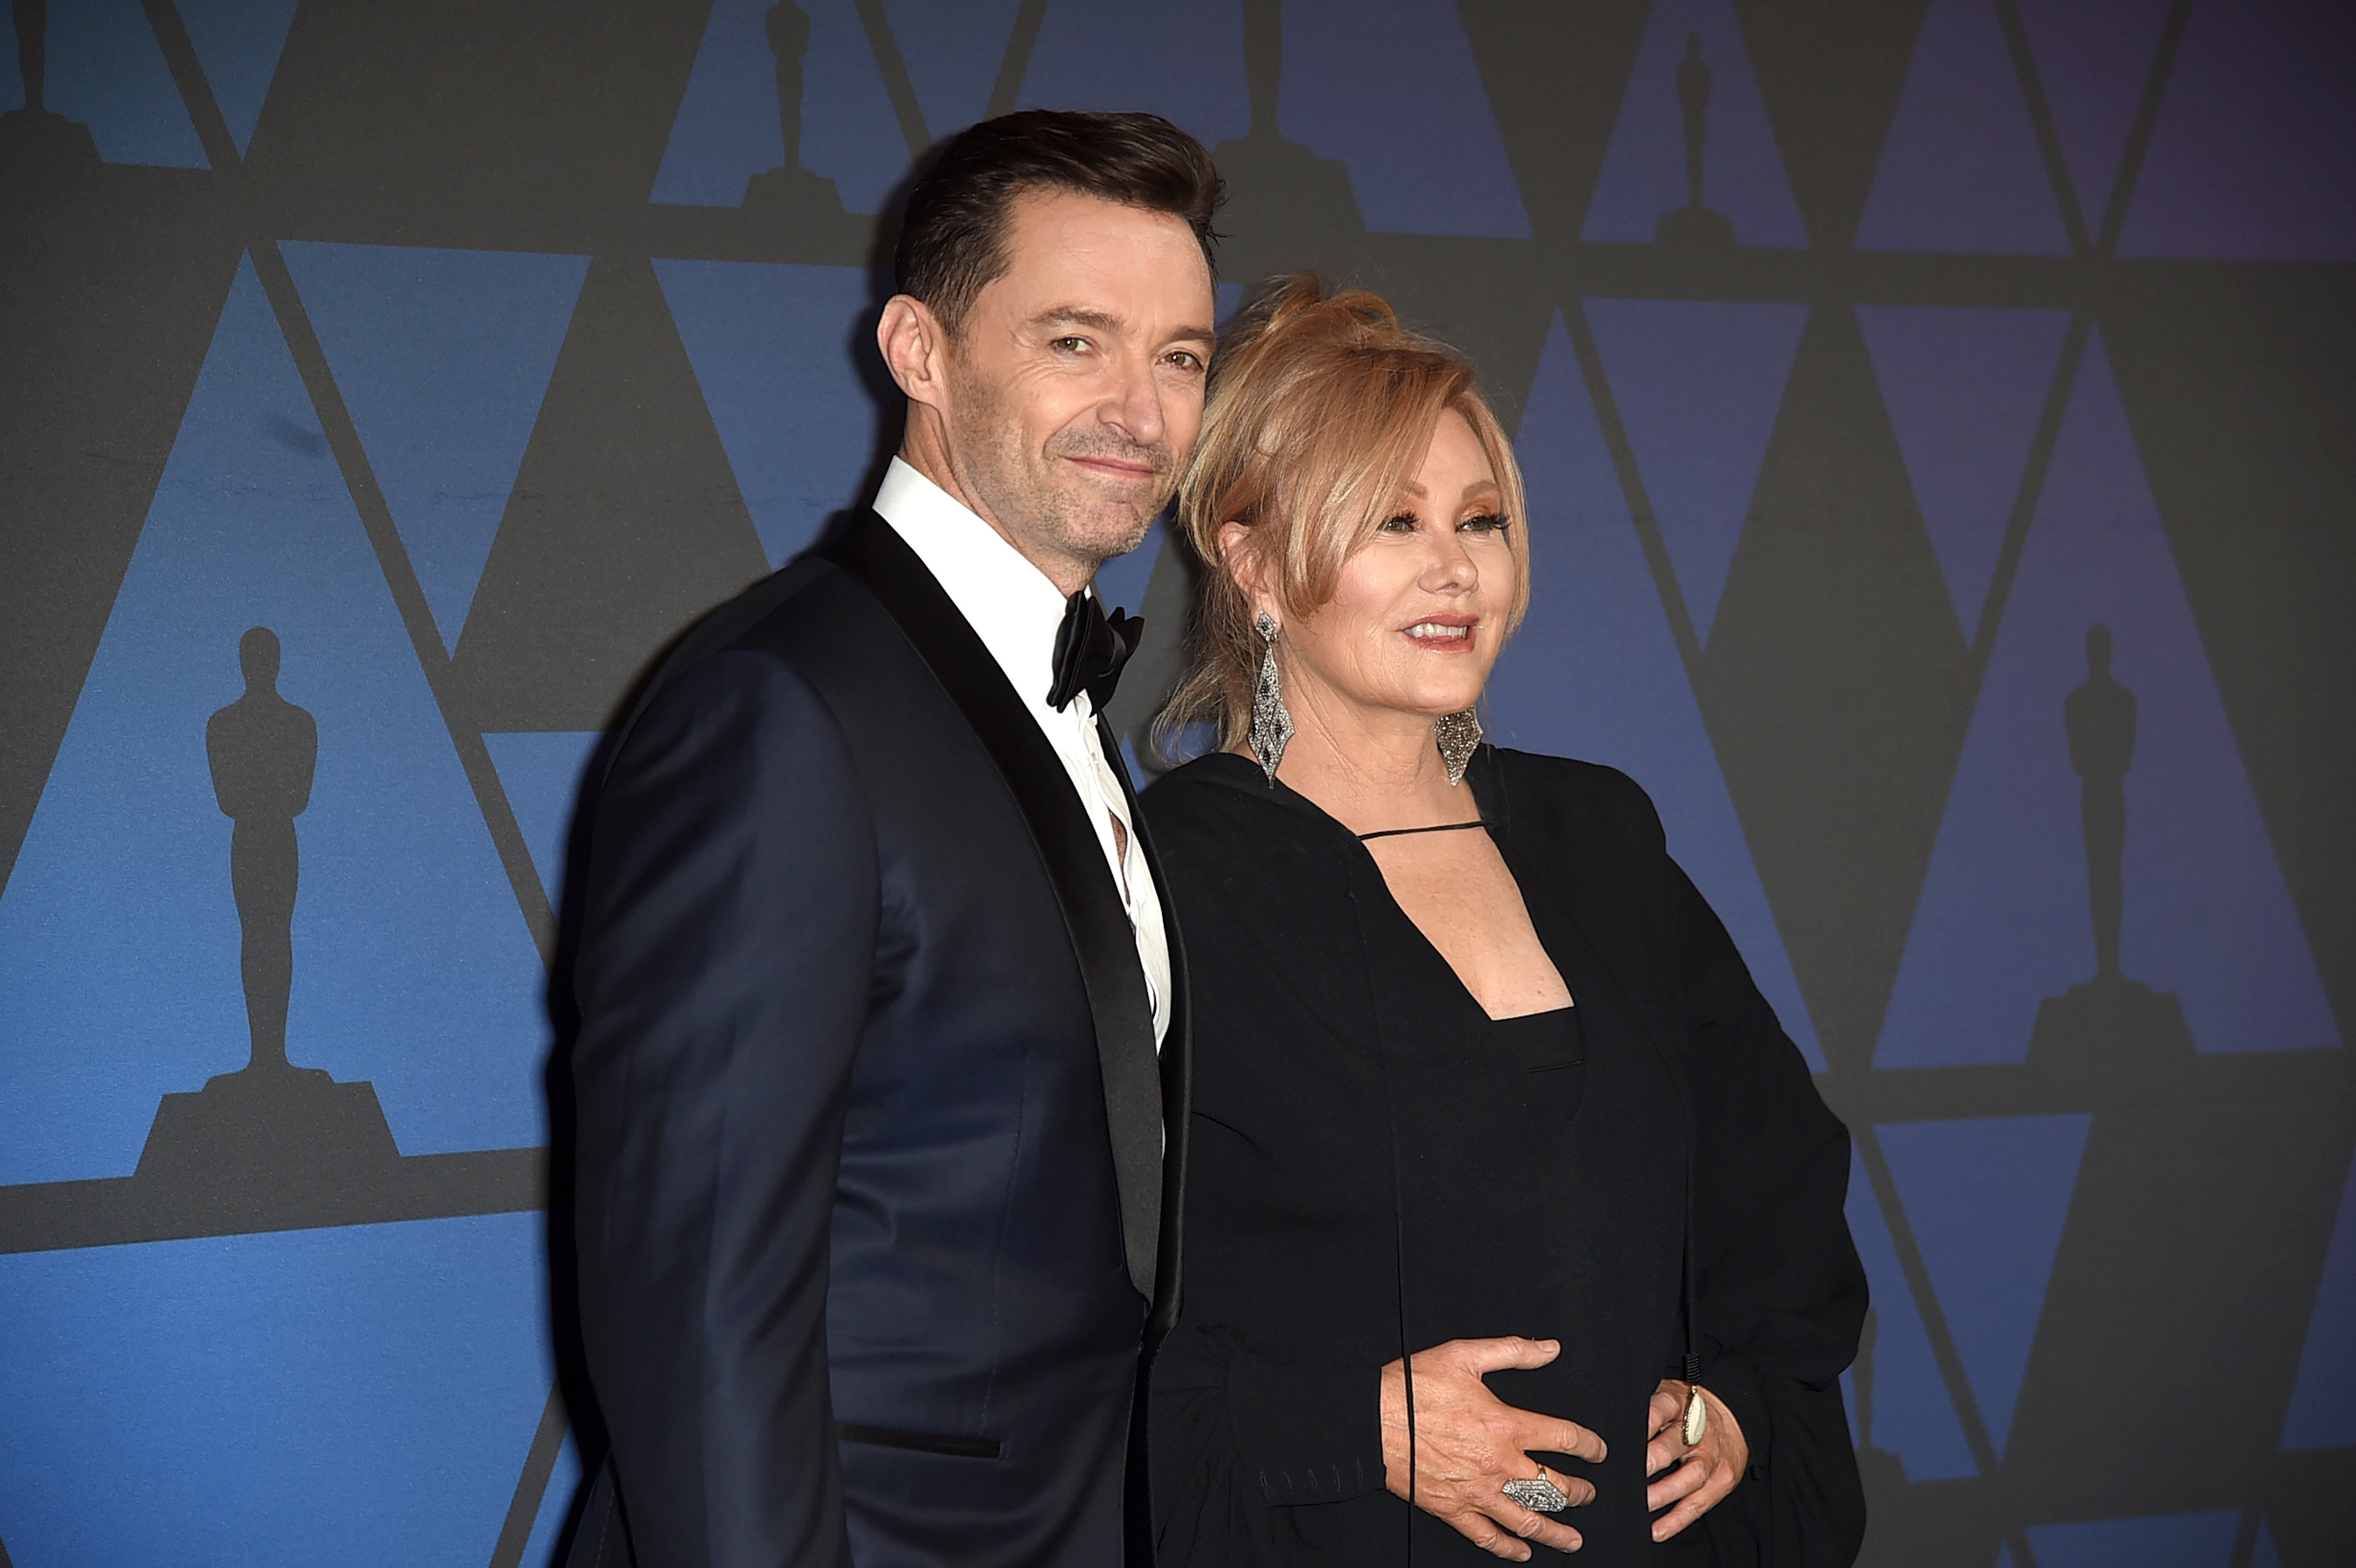 Hugh Jackman and Deborra-Lee Furness at Hollywood & Highland Center on November 18, 2018 in Hollywood, California. | Source: Getty Images